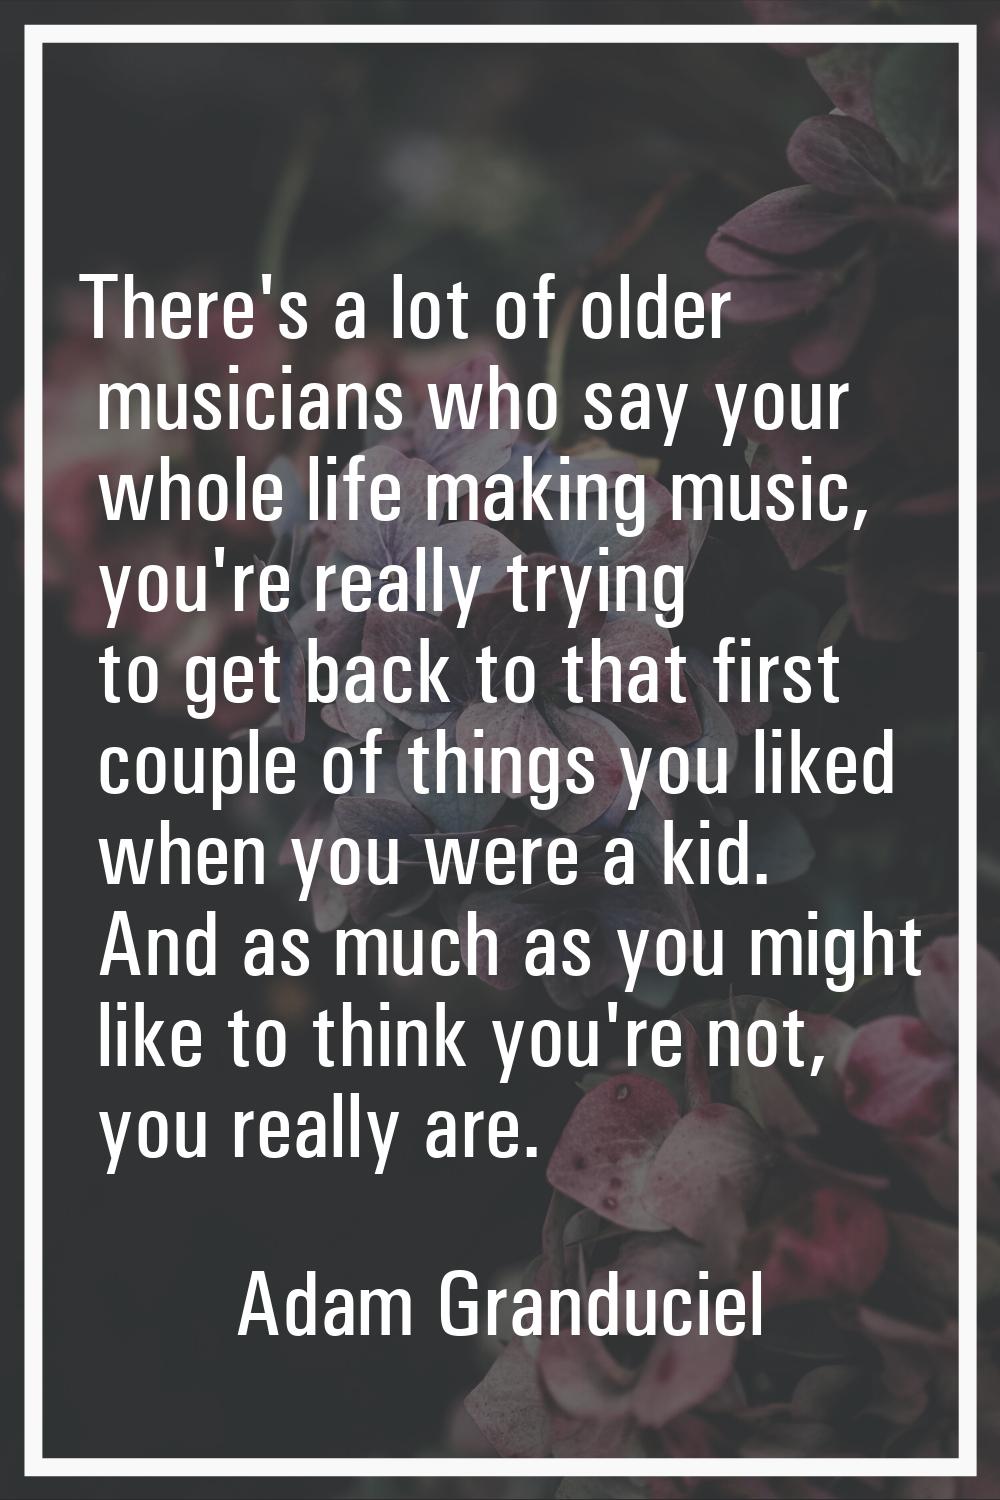 There's a lot of older musicians who say your whole life making music, you're really trying to get 